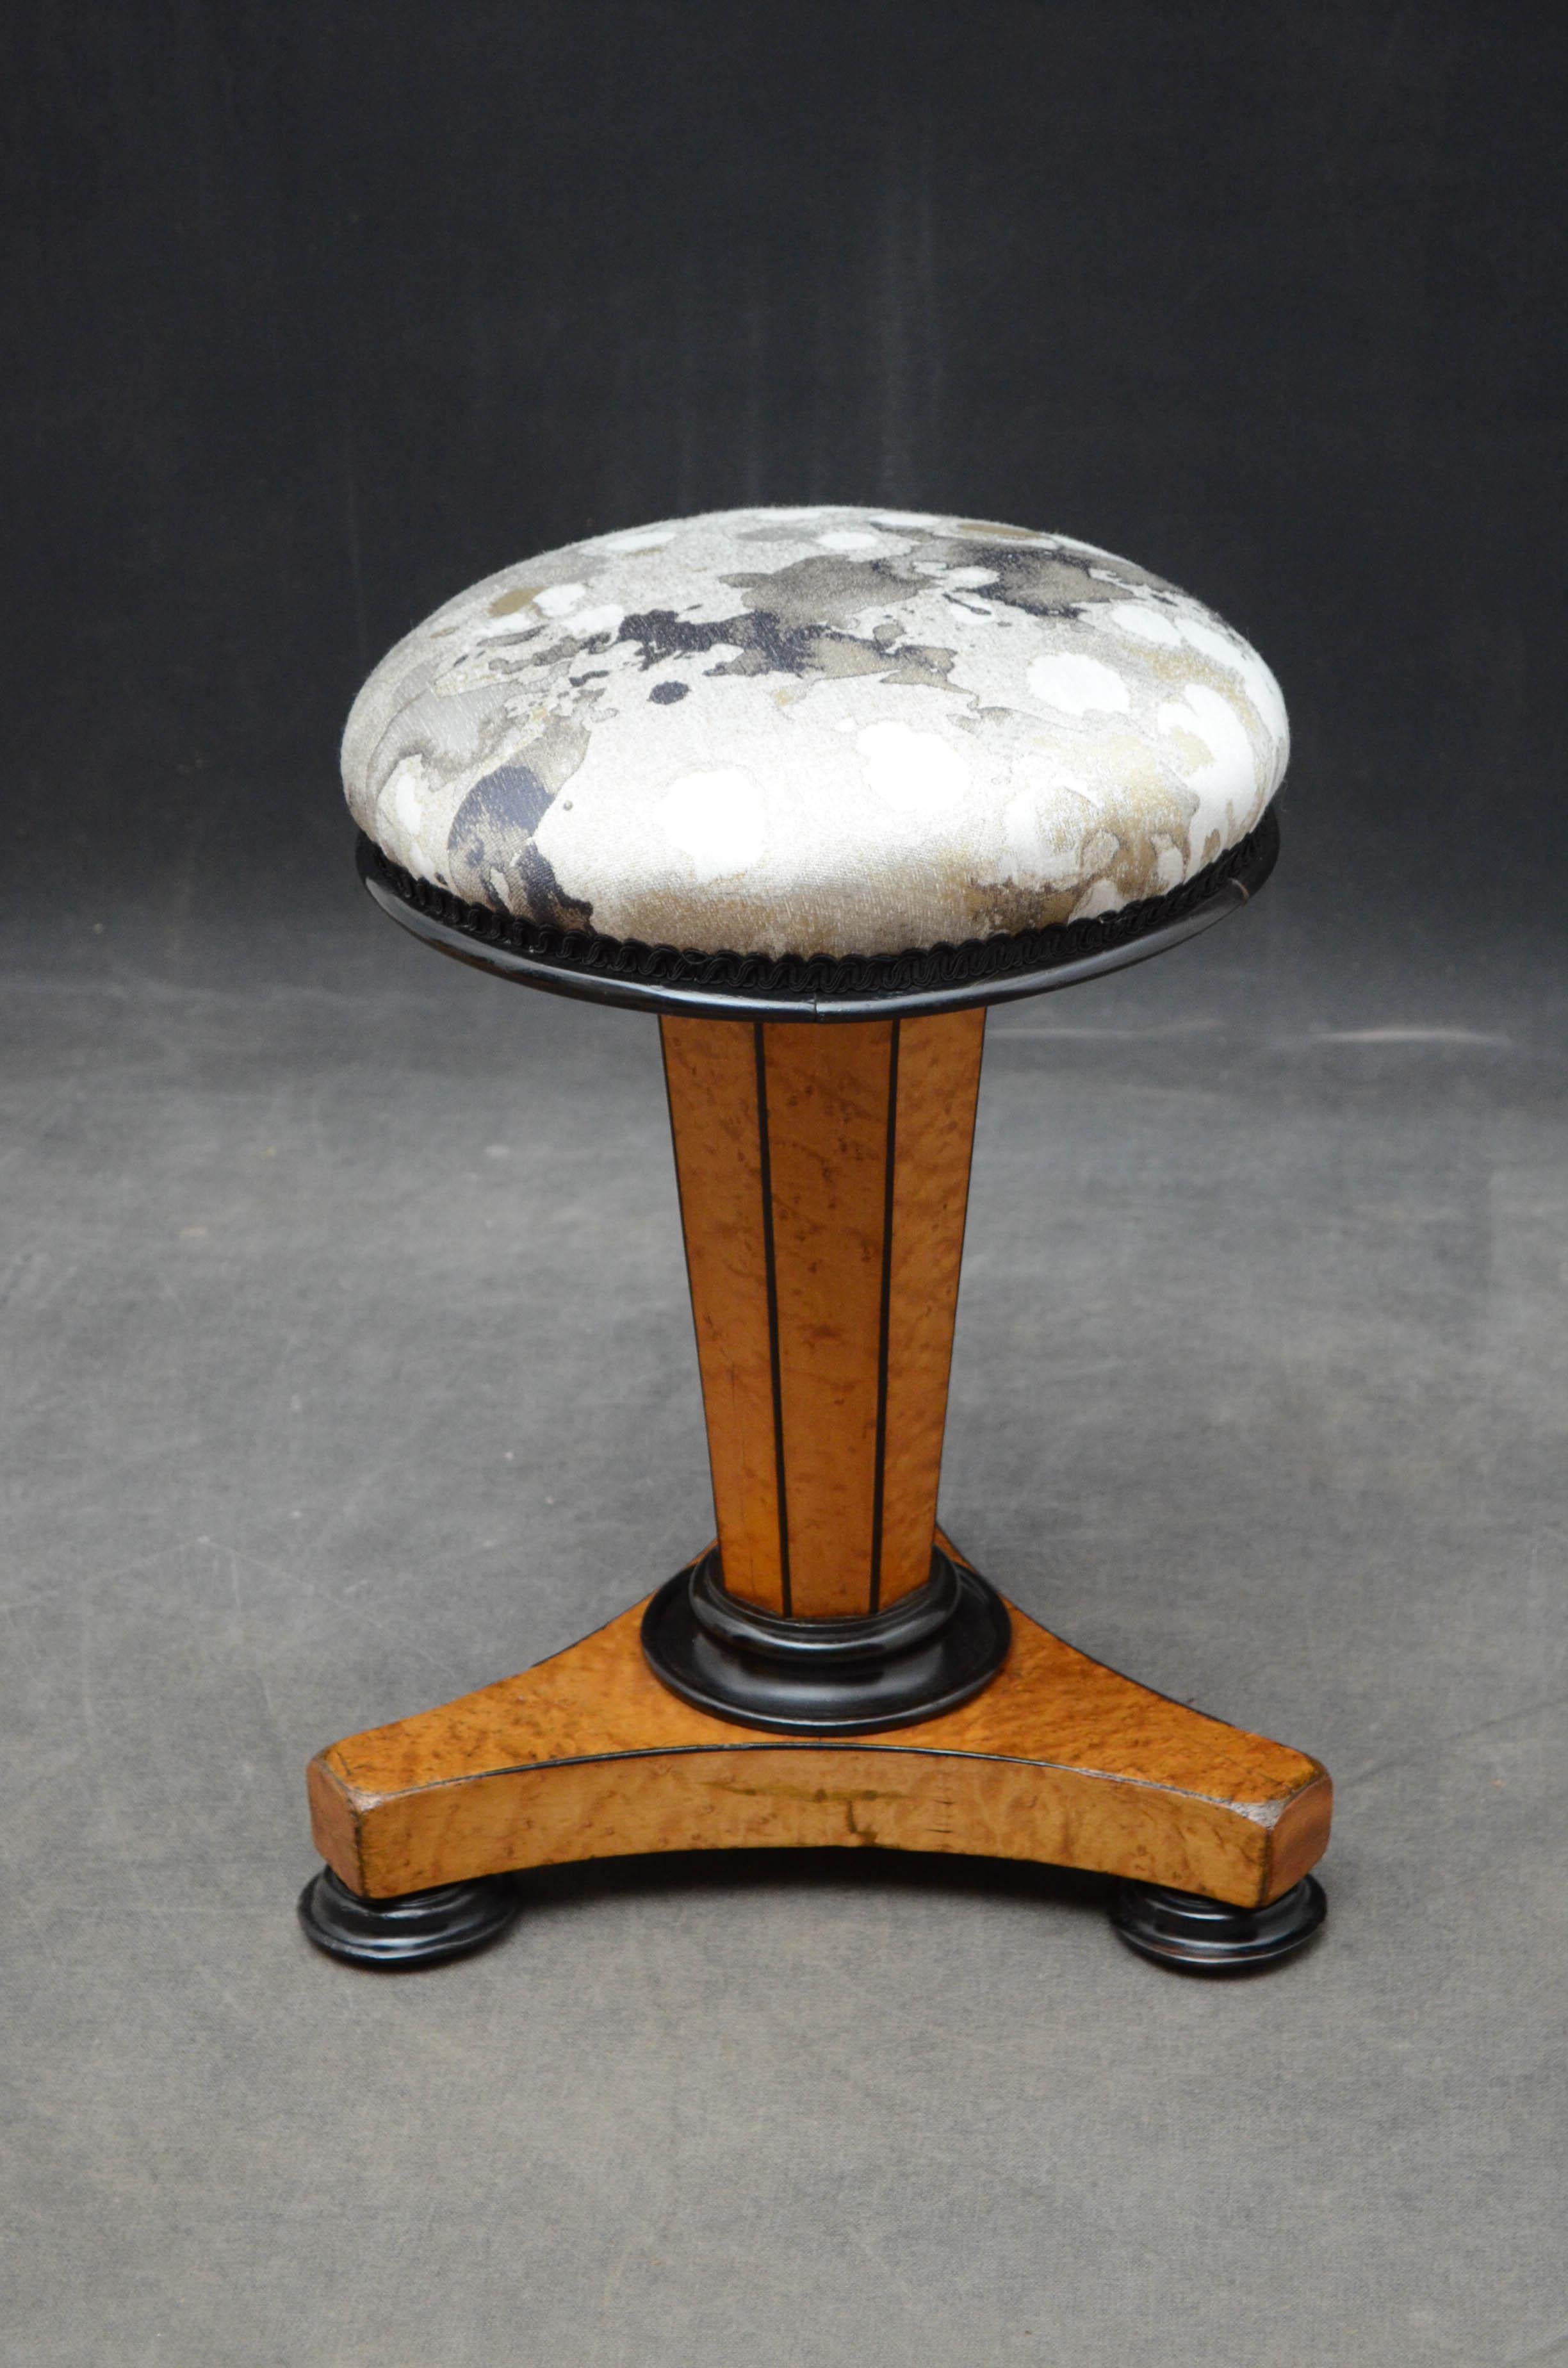 Sn4621 Unusual William IV bird's eye maple dressing table stool with revolving, height adjustable seat, flat faceted column and 3 ebonized pad feet, circa 1835
Measures: Height 18-21